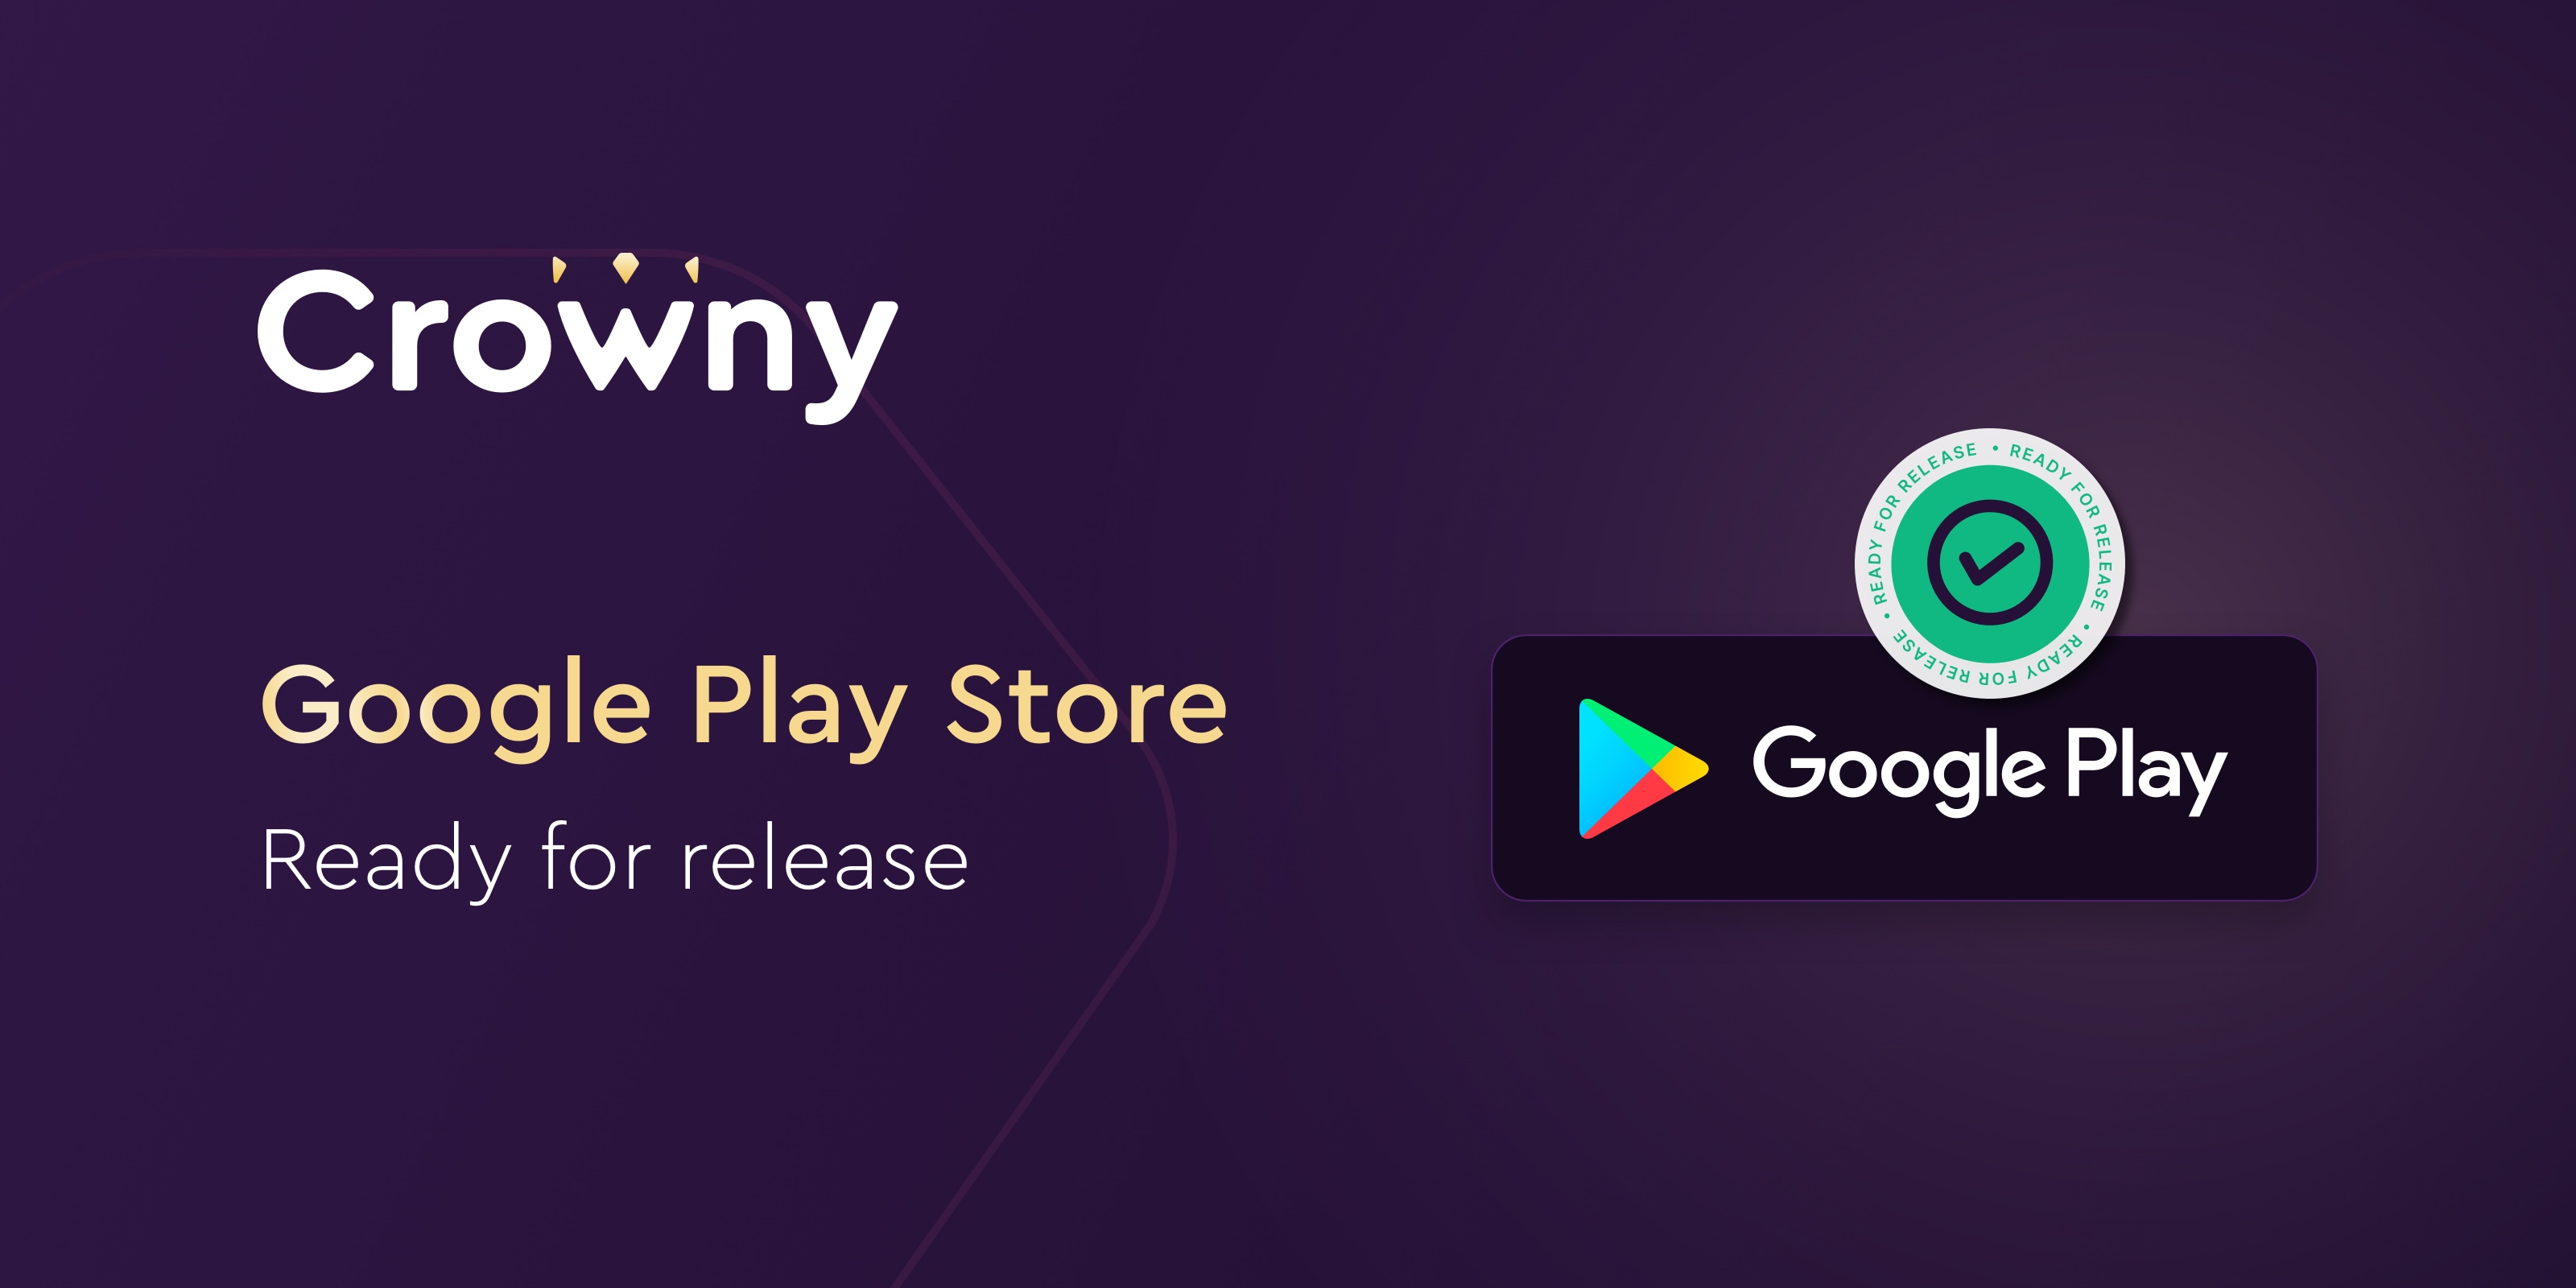 Crowny App Google Play Store Release